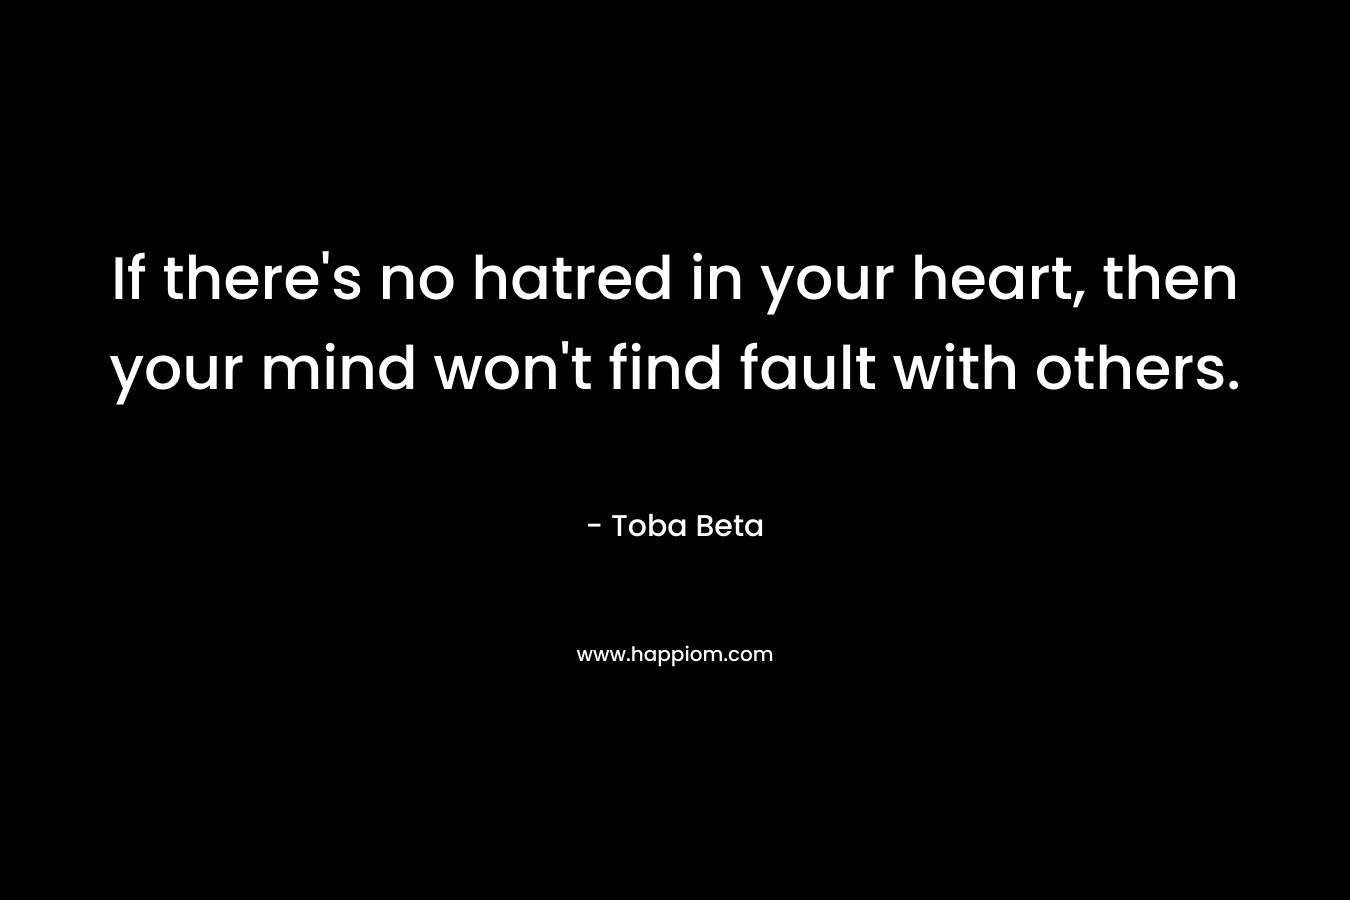 If there’s no hatred in your heart, then your mind won’t find fault with others. – Toba Beta